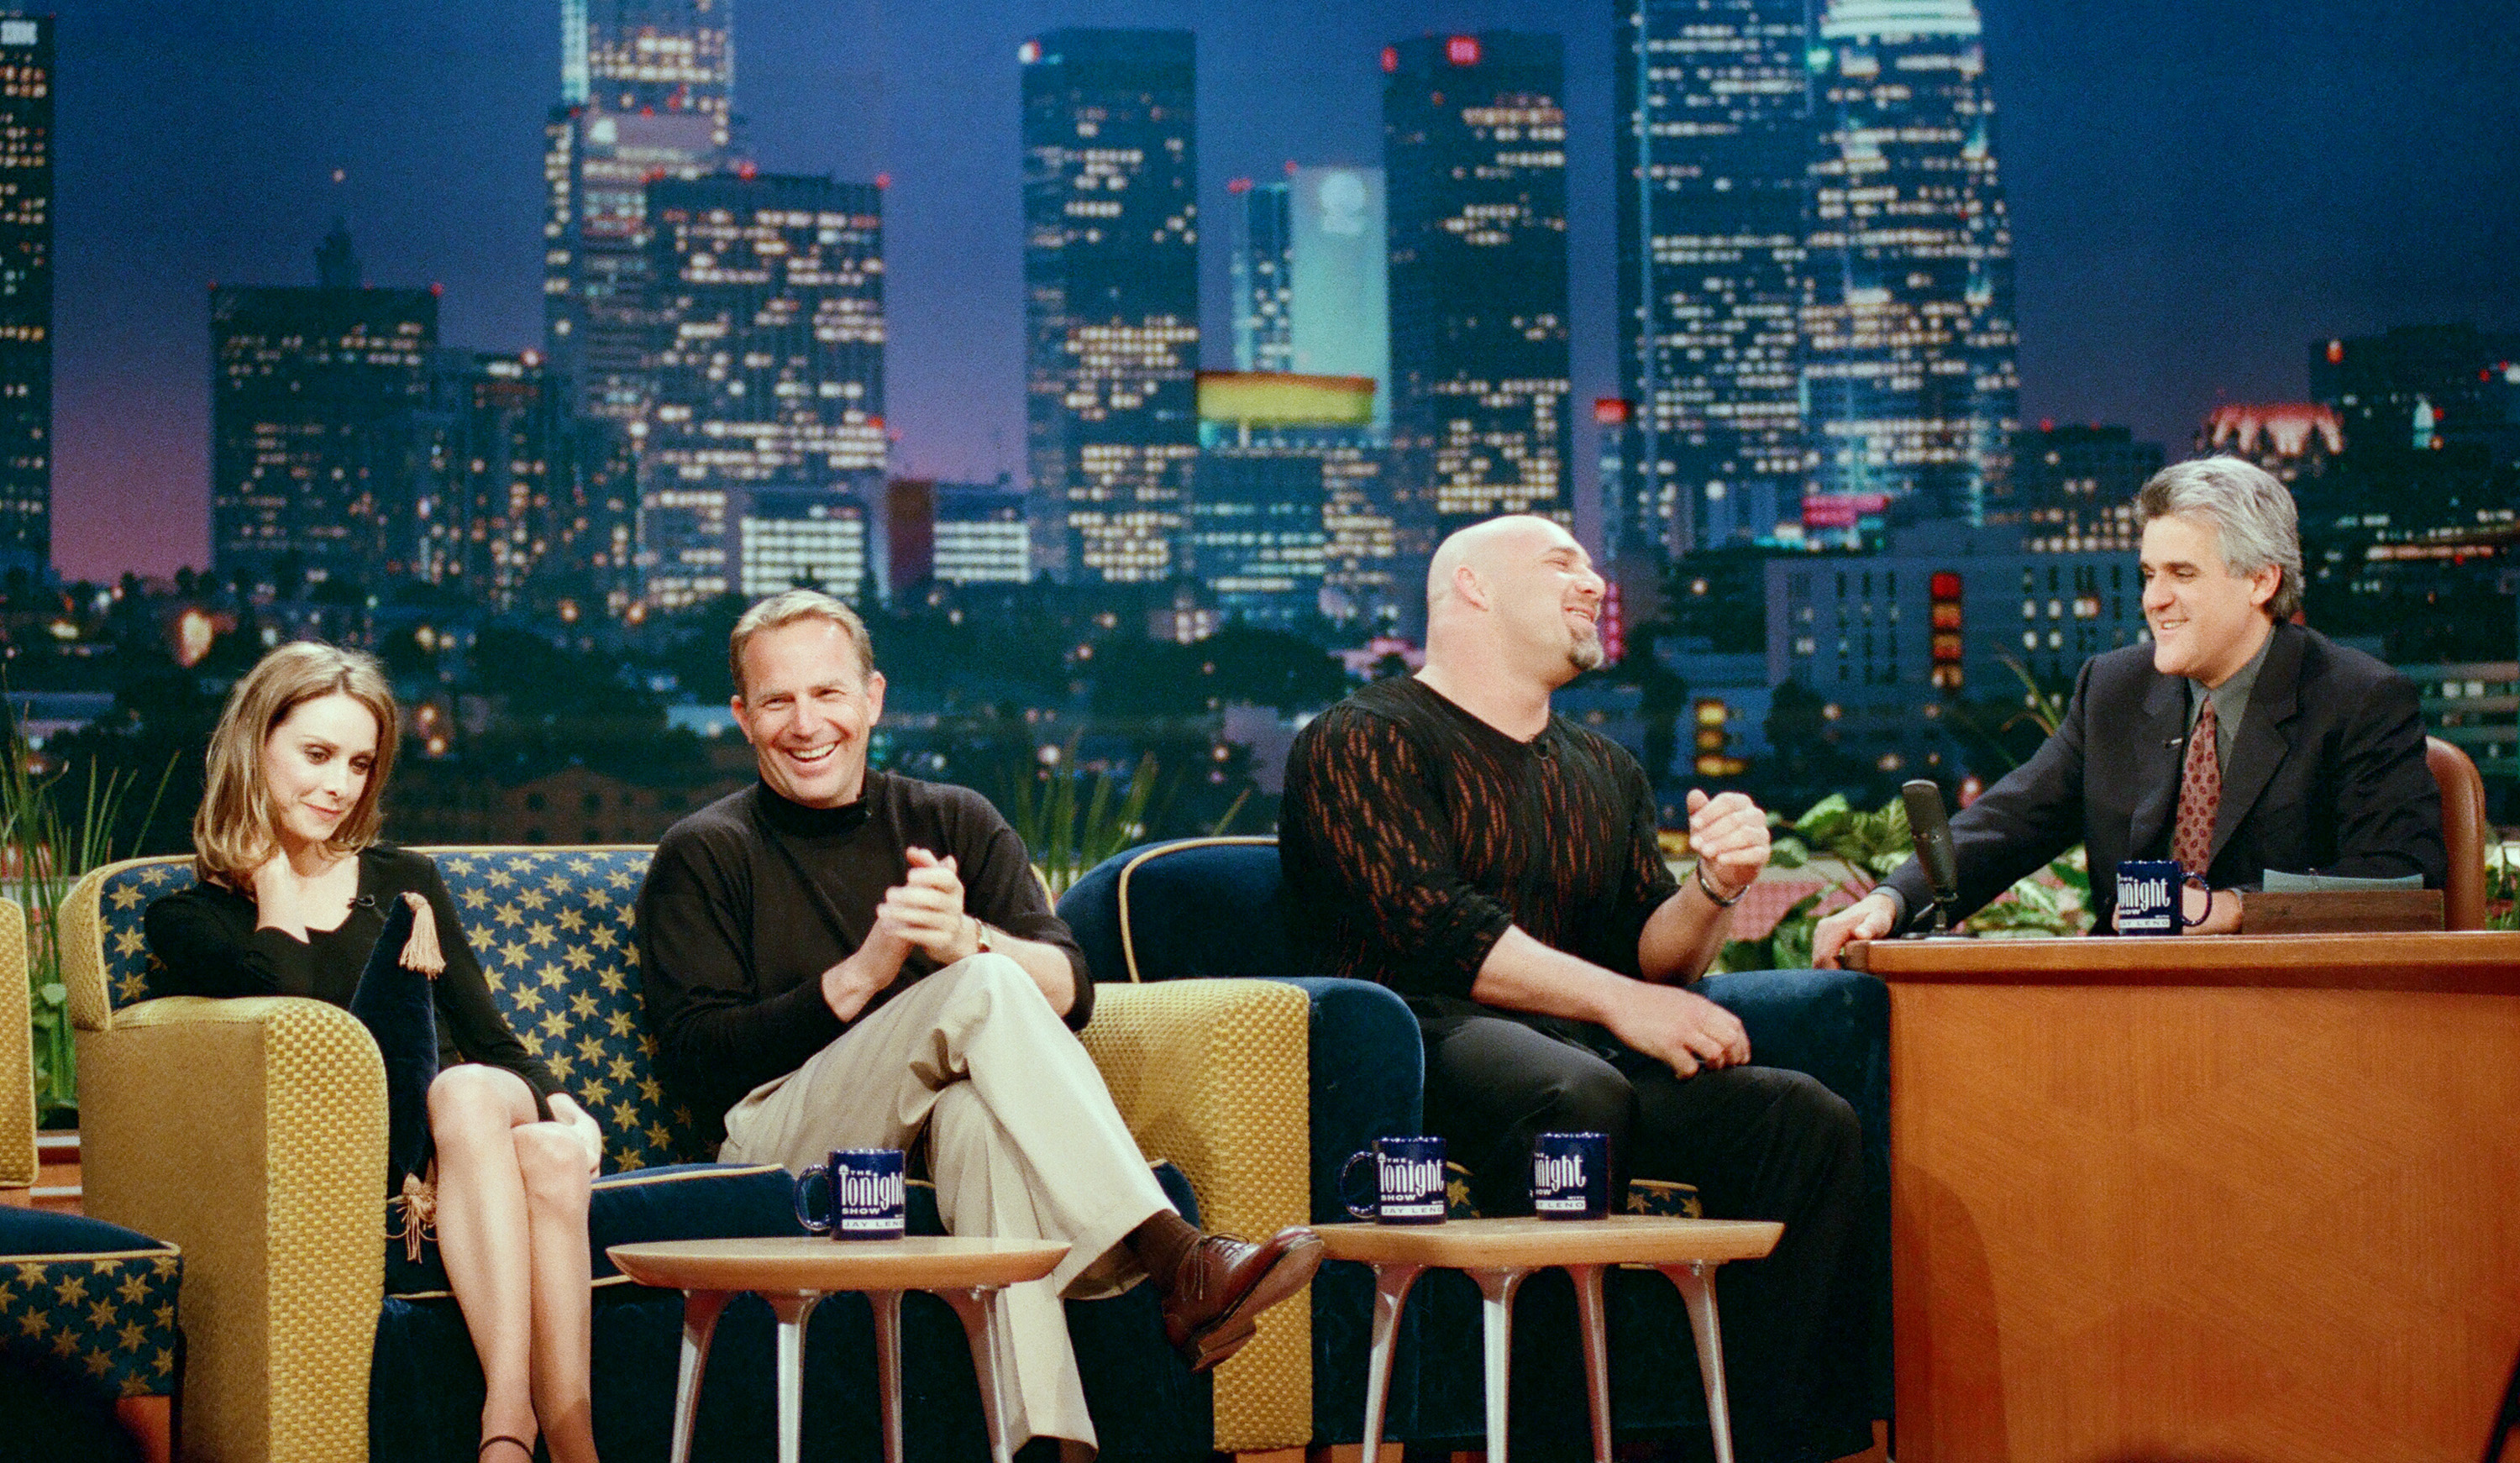 THE TONIGHT SHOW WITH JAY LENO -- Episode 1550 -- Pictured: (l-r) Actress Calista Flockhart, actor/director Kevin Costner, wrestler Goldberg, host Jay Leno during an interview on February 19, 1999 -- (Photo by: Joseph Del Valle/NBC/NBCU Photo Bank via Getty Images)